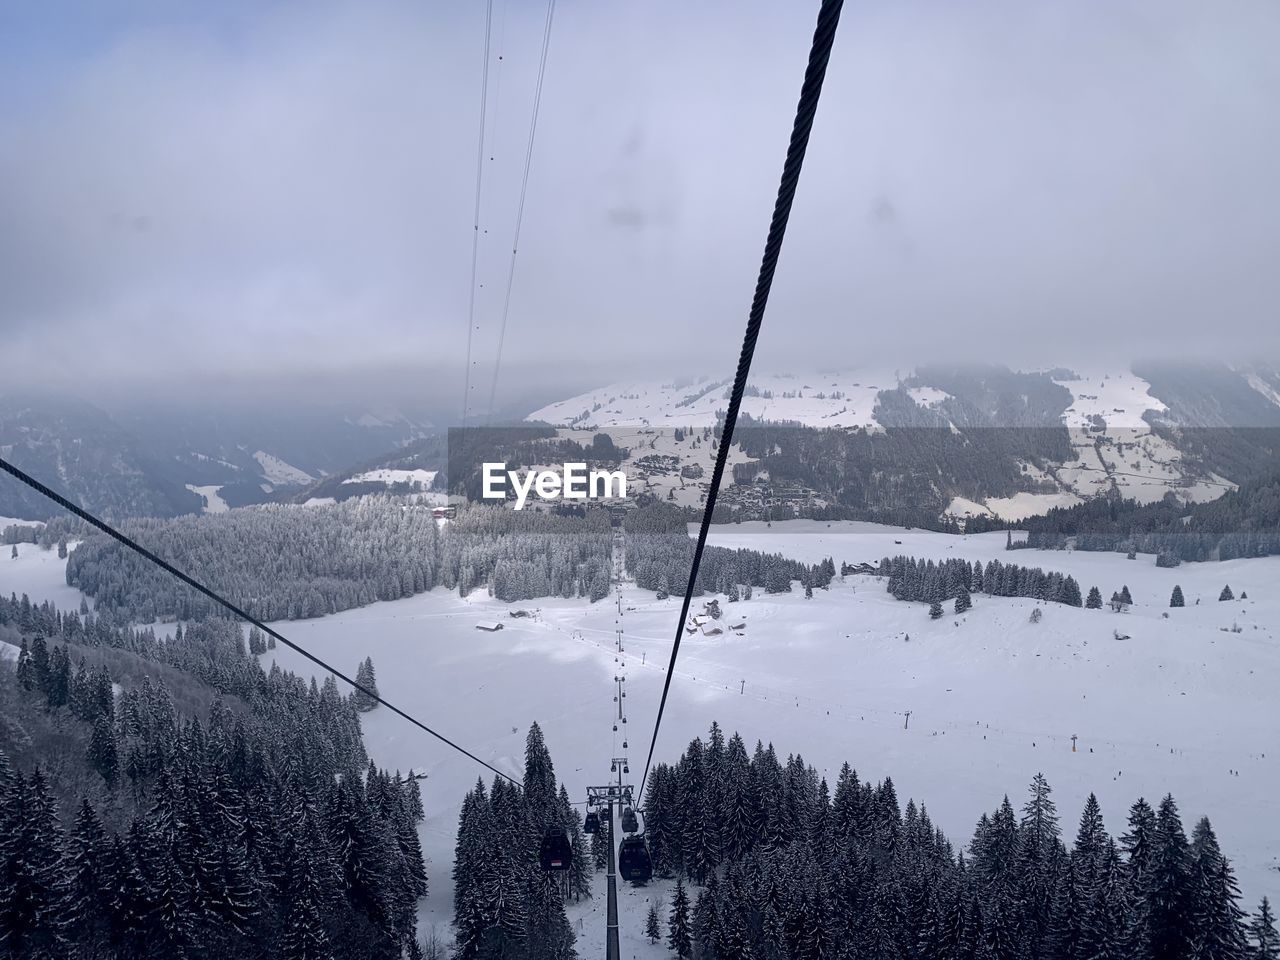 snow, mountain, winter, cold temperature, scenics - nature, beauty in nature, environment, sky, mountain range, nature, tree, landscape, tranquil scene, skiing, plant, cable car, tranquility, travel, forest, snowcapped mountain, cloud, land, travel destinations, ski equipment, pinaceae, overhead cable car, coniferous tree, ski lift, cable, vacation, ski, non-urban scene, day, holiday, tourism, trip, pine tree, outdoors, pine woodland, fog, idyllic, sports, winter sports, piste, architecture, transportation